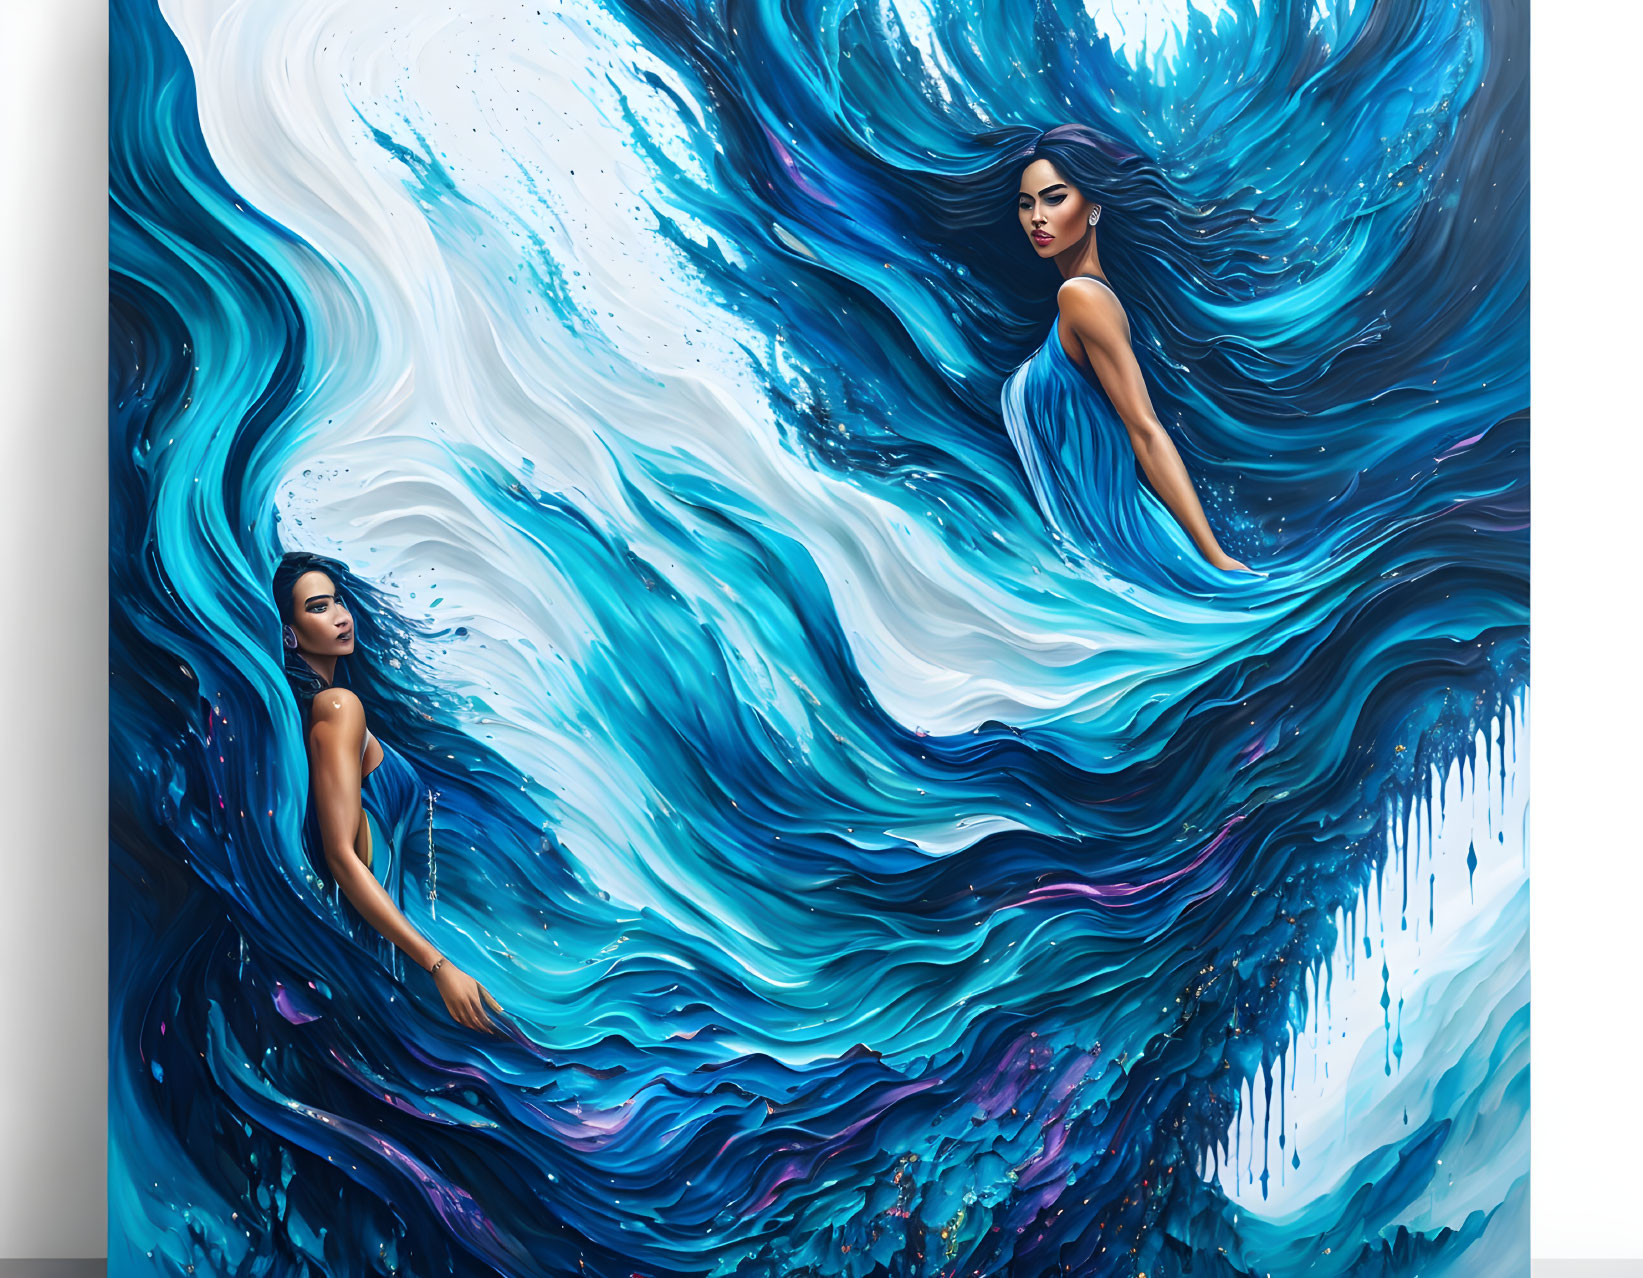 Abstract Painting: Two Women with Flowing Hair and Ocean Waves